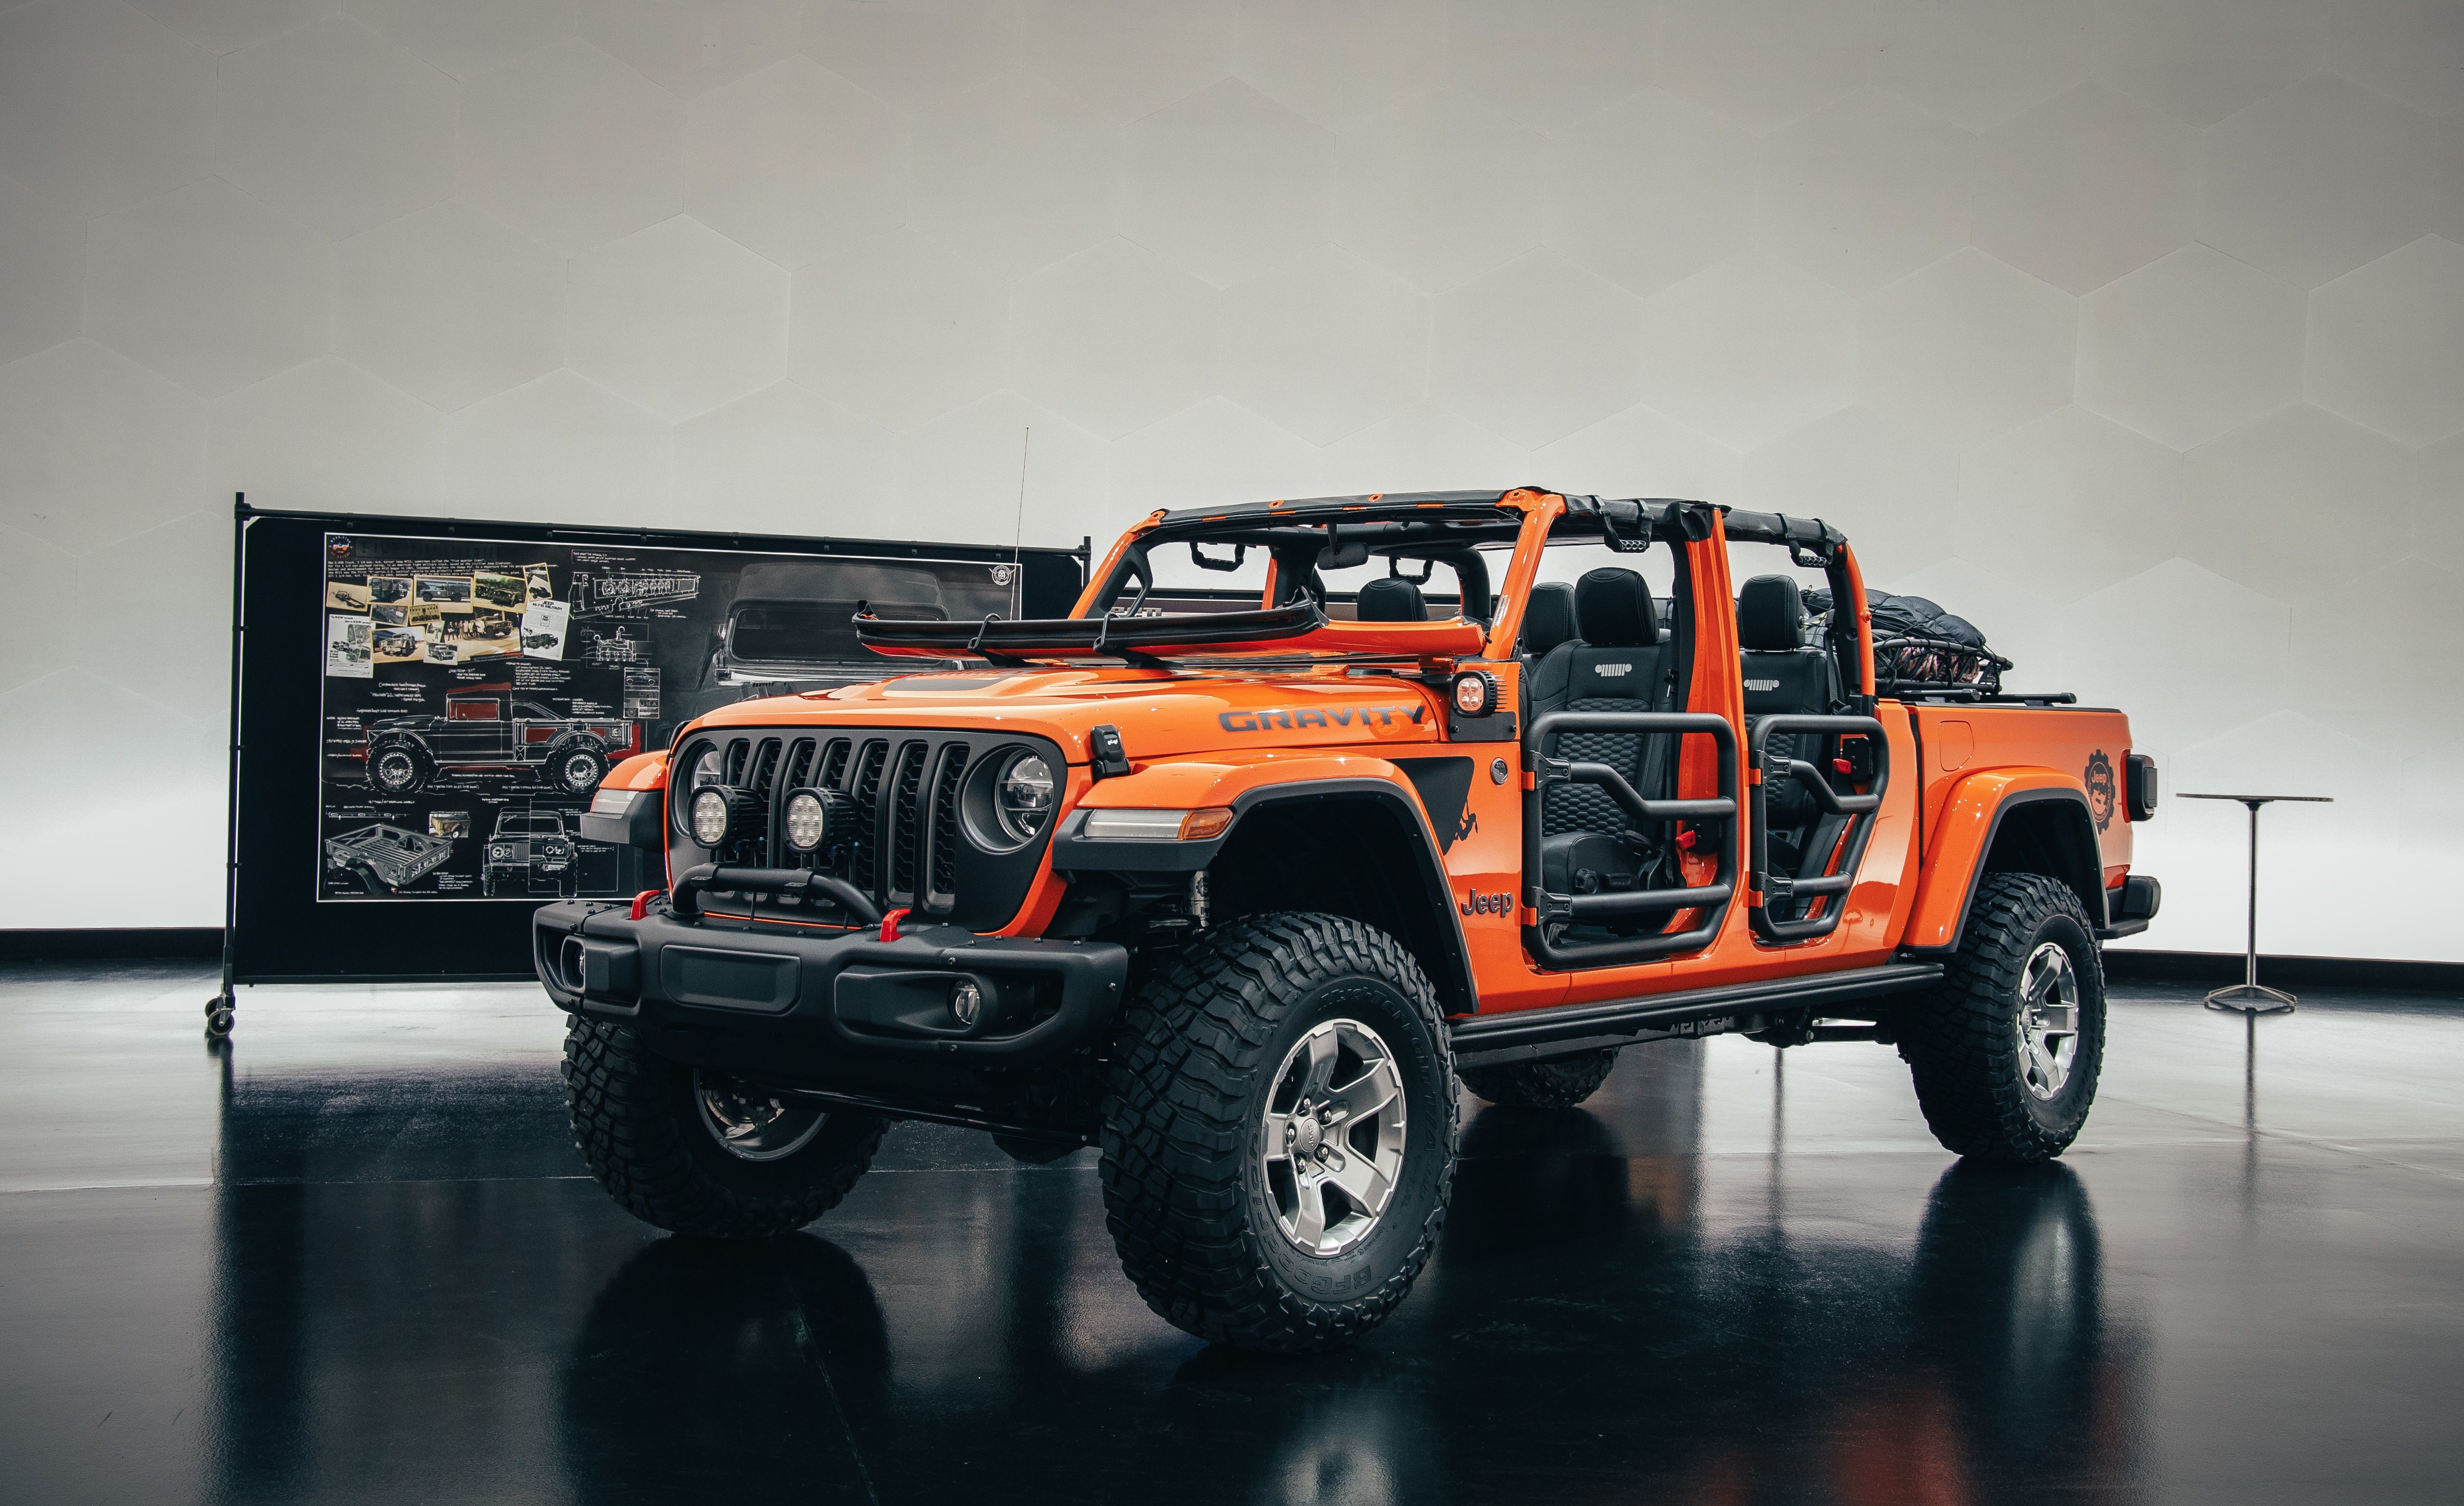 Jeep Gladiator Gravity Wallpaper Hd Cars 4k Wallpapers Images Photos And Background Wallpapers Den